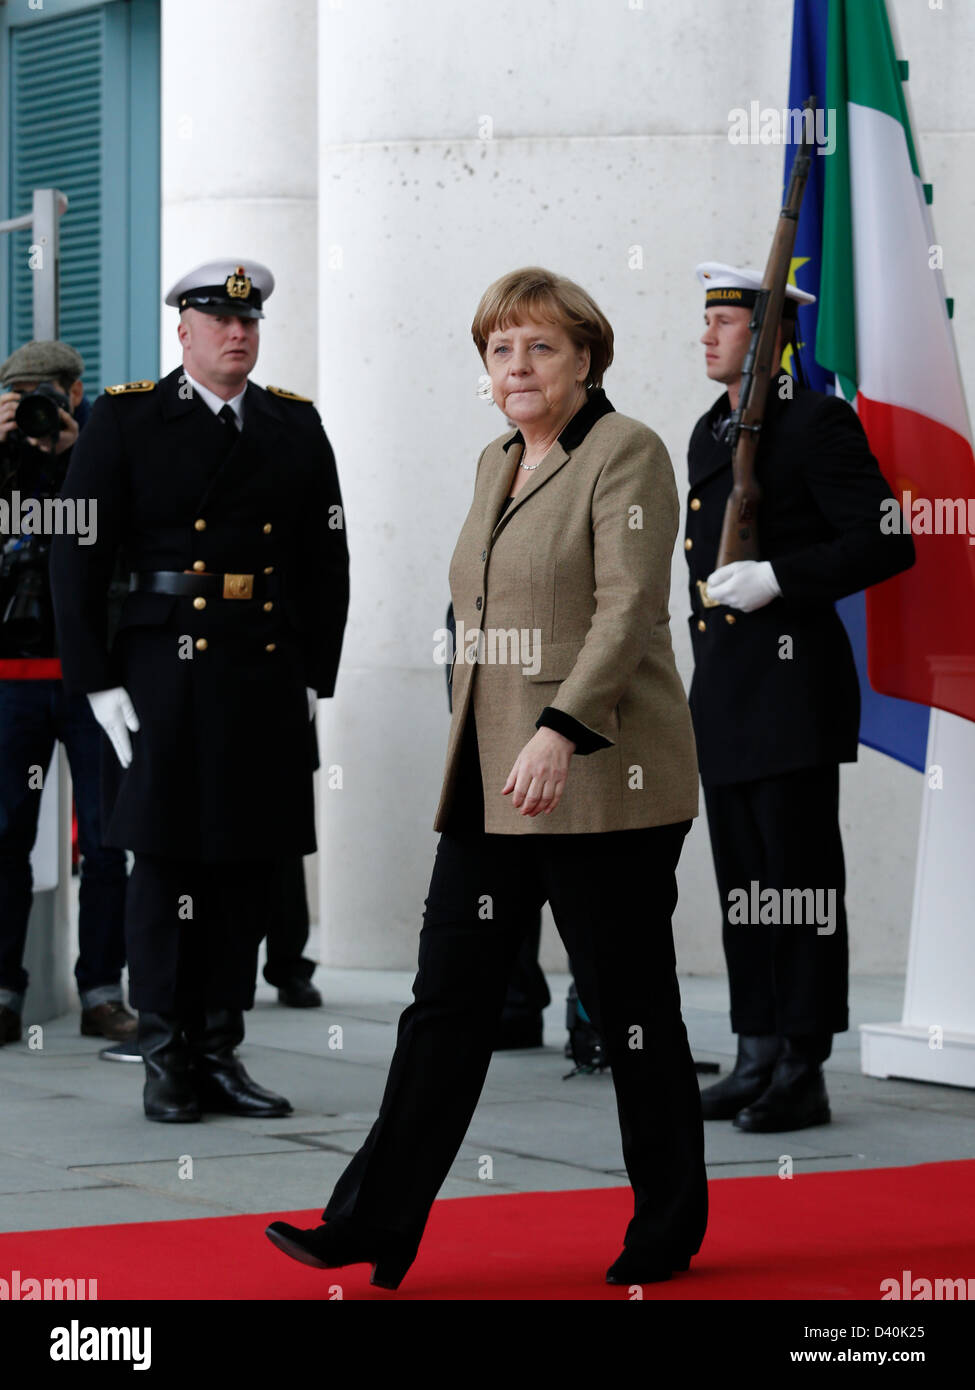 Berlin, 28th February, 2013. German Chancellor Merkel welcomes Italiens Staatspräsident Giorgio Napolitano at the Chancellery in Berlin. Topics of the meeting are the results of the election and the future of the country at the european debt crisis. / Berlin, 28. Februar 2013. Merkel begrüßt Italiens Staatspräsident Giorgio Napolitano. Themen des Treffens sind die Ergebnisse der Wahl und der Zukunft des Landes in der europäischen Schuldenkrise. On picture: Angela Merkel (CDU), German Chancellor, meets President Giorgio Napolitano of Italy for bilateral talks at Chancellery in Berlin. Stock Photo